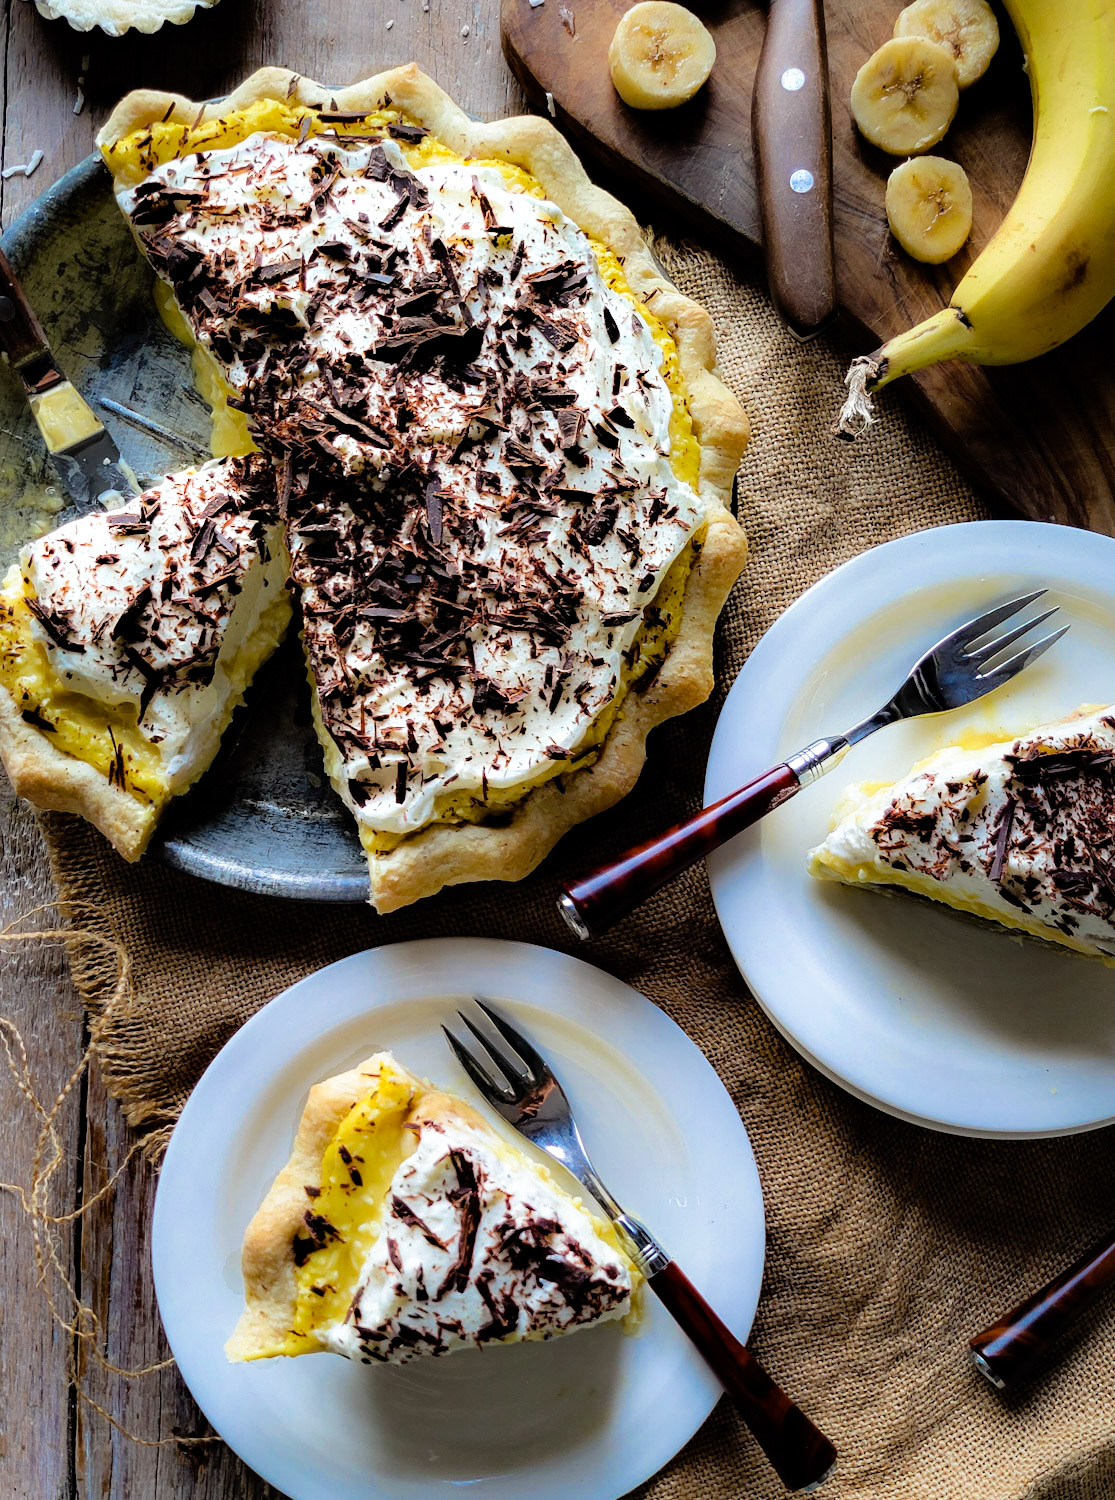 A full Black Bottom Banana Coconut Cream Pie, with two slices served up, and a sliced banana in the background.